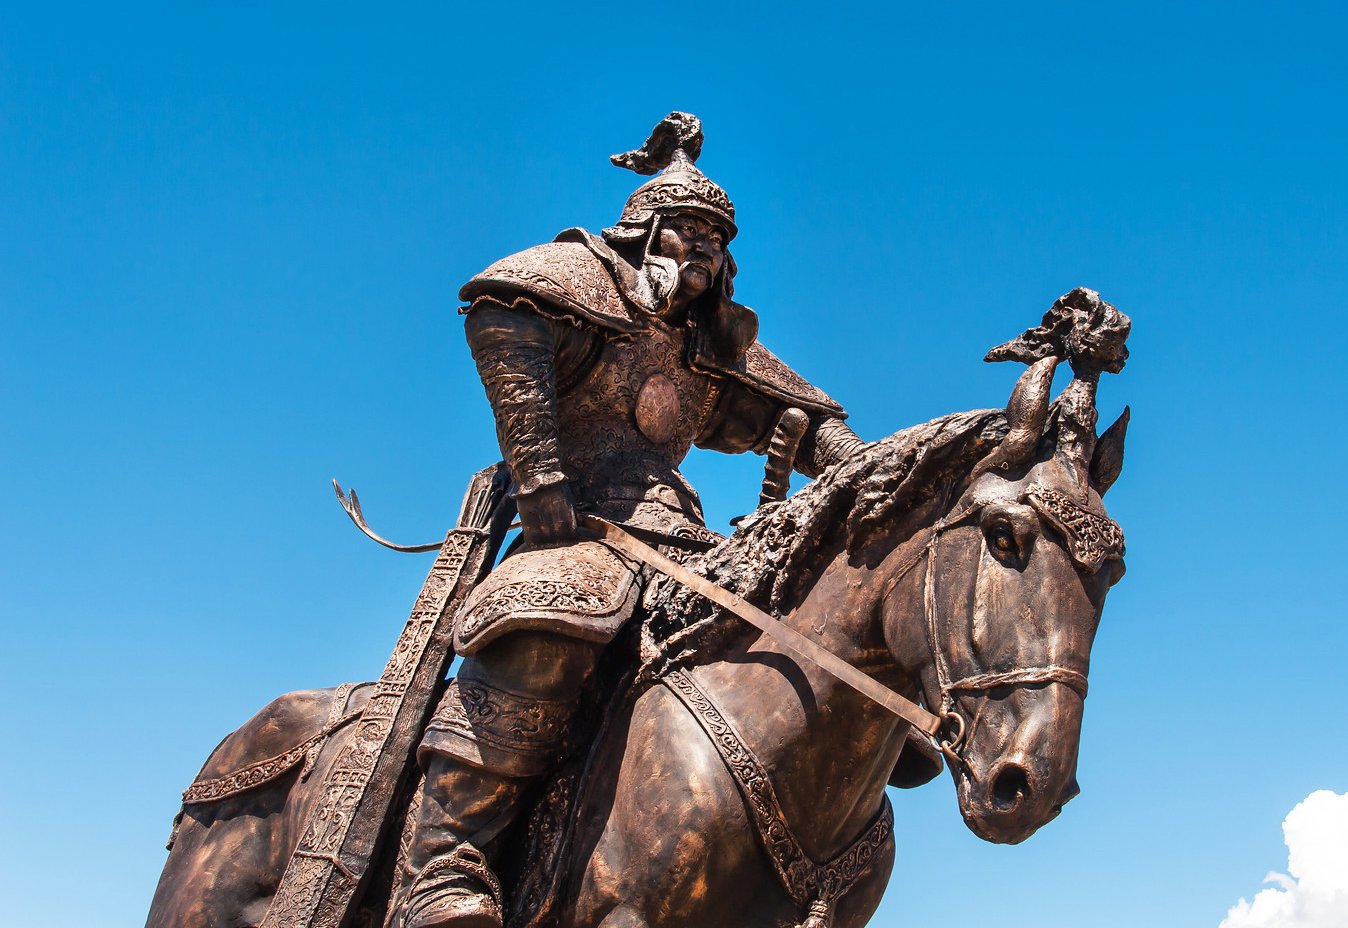 A photo of a bronze statue of a Mongolian general, possibly Jebe, on a horse in the Chinggis Khaan Statue Complex.